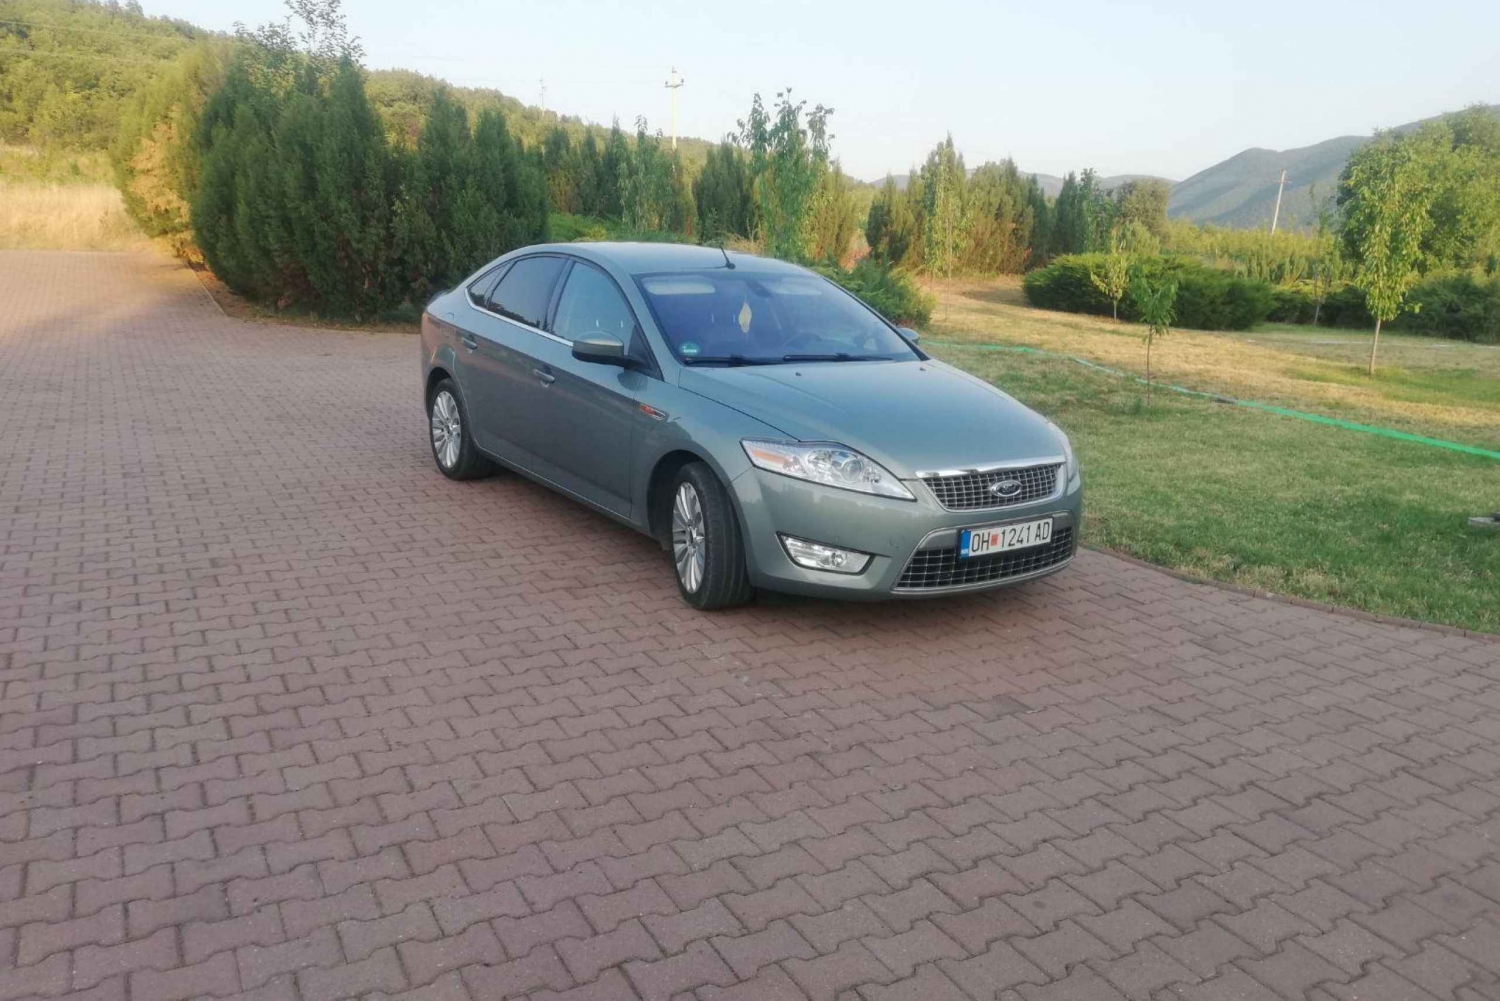 Private transfer from Ohrid to Tirana or back, 24-7!